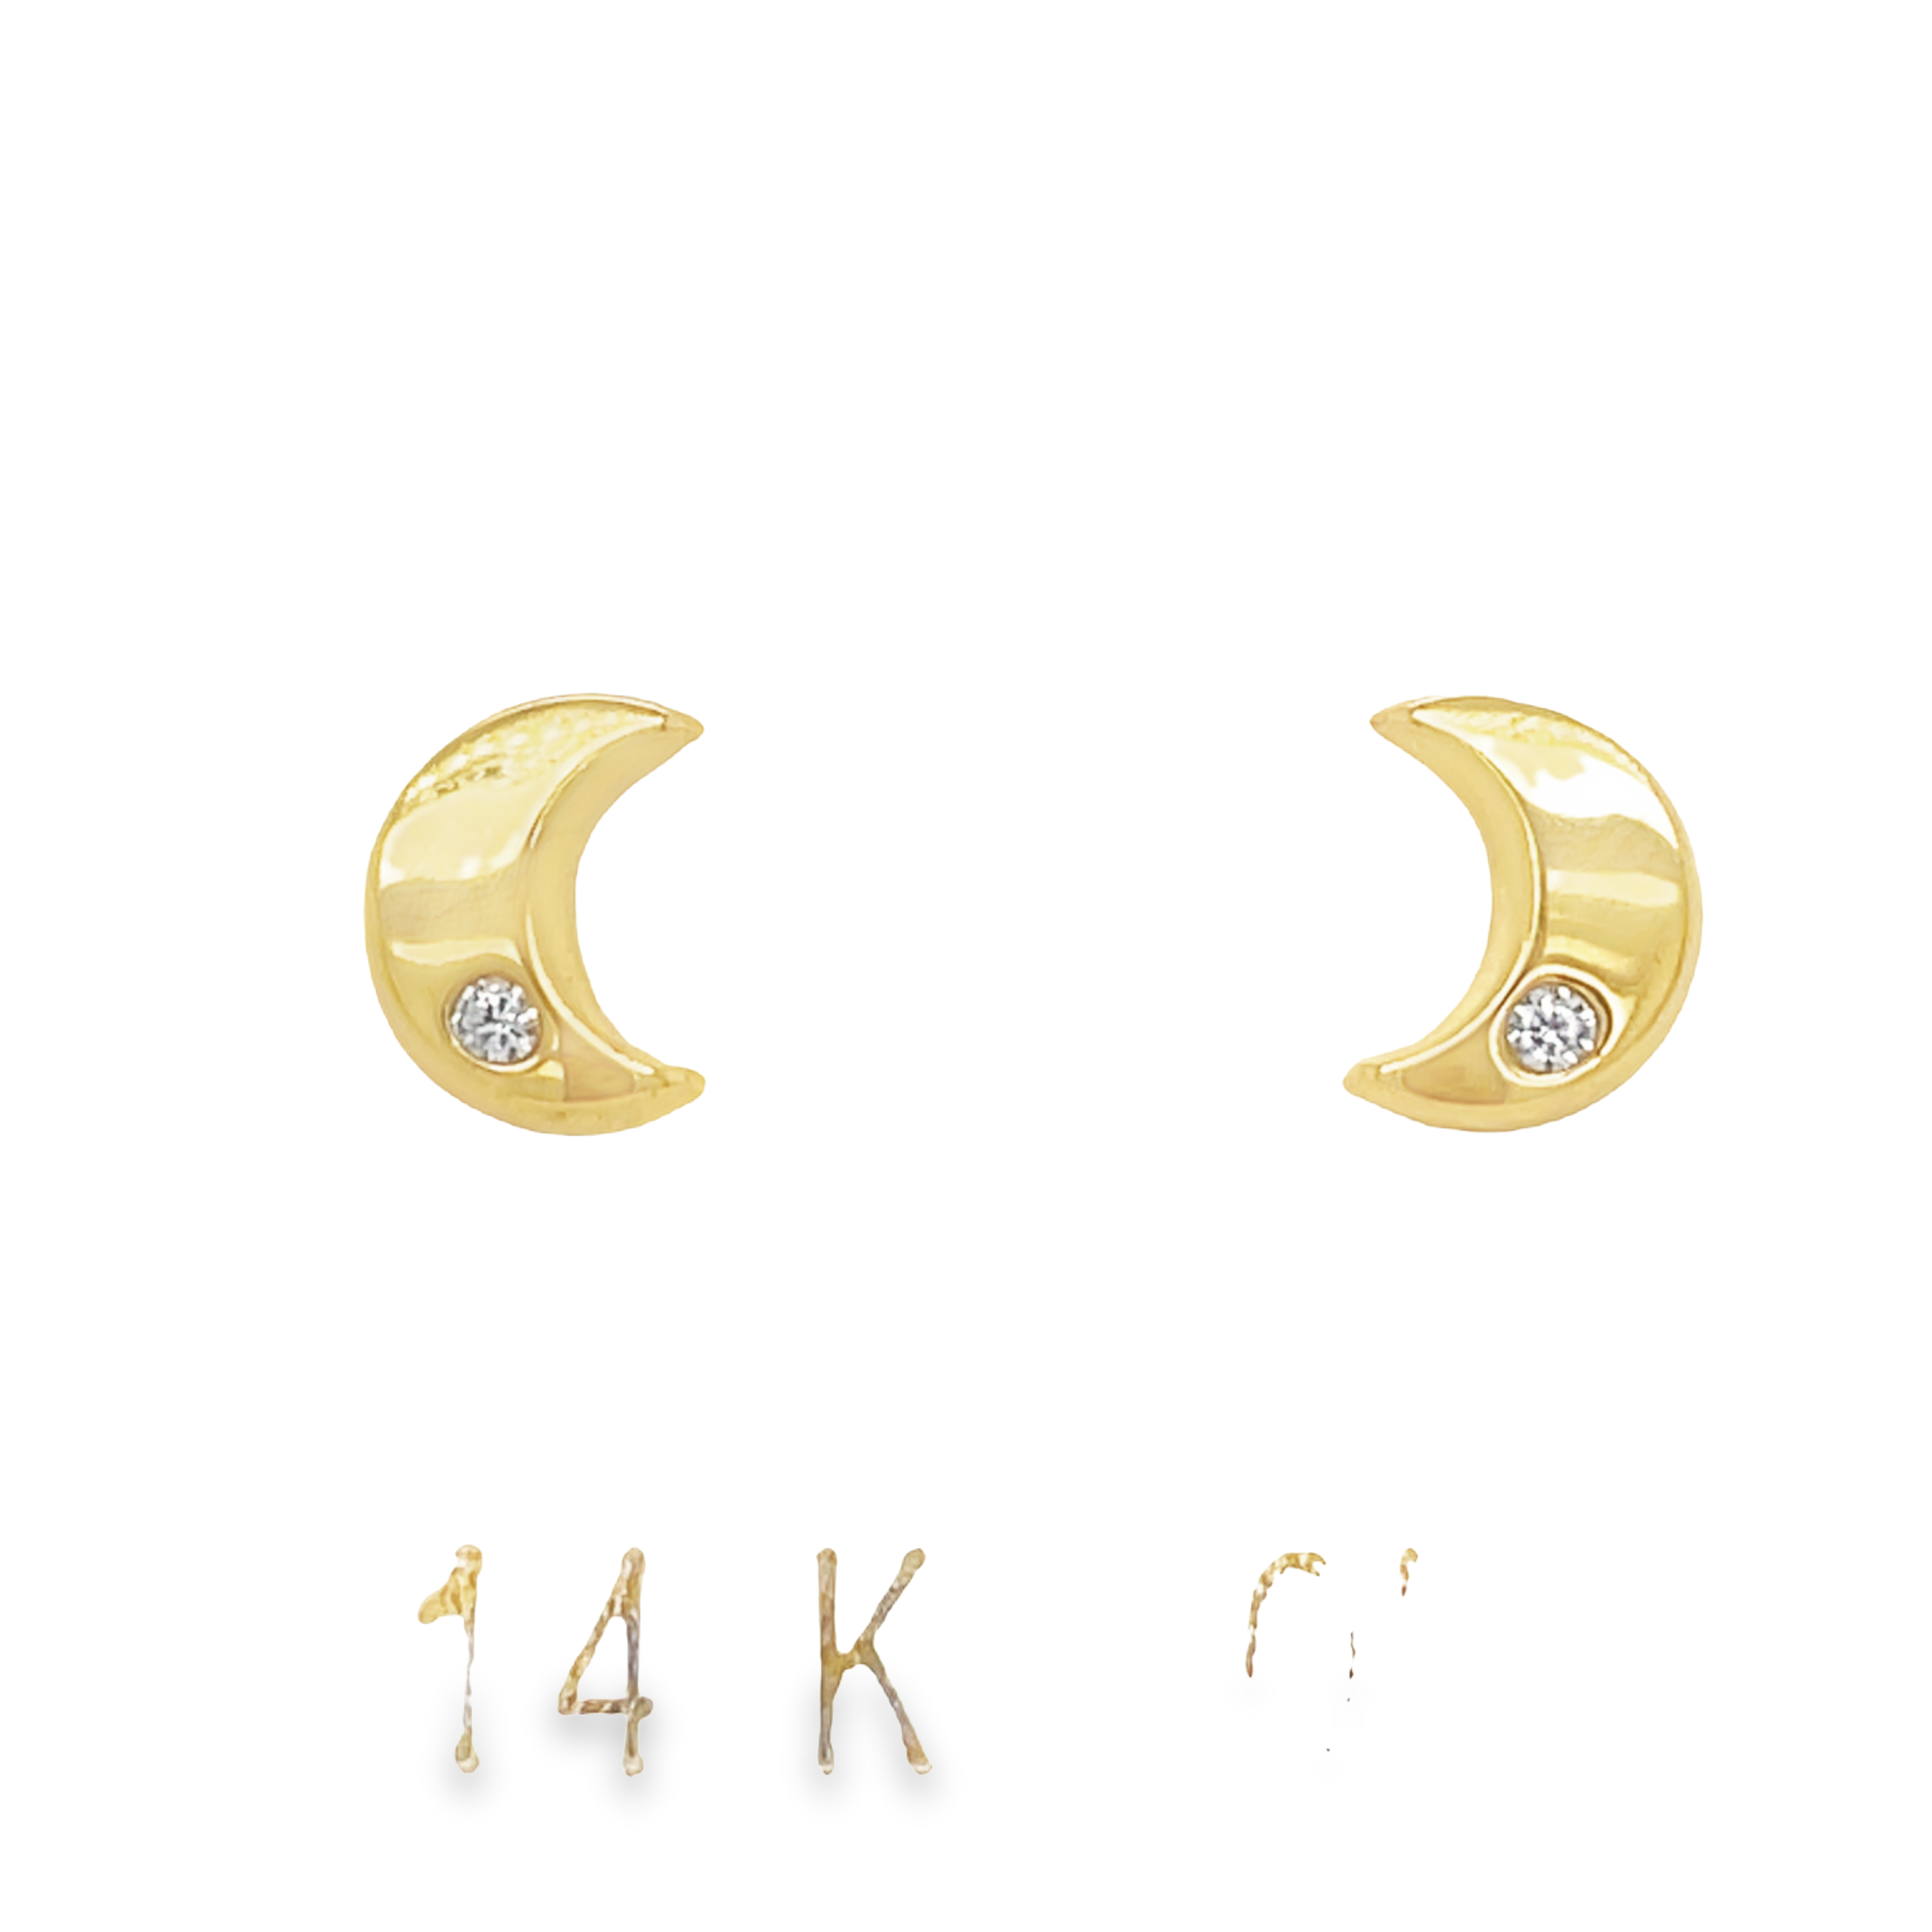 These 14K Gold Crescent Moon Baby Earrings are a fantastic addition to any infant's wardrobe. Crafted from 14K yellow gold, these earrings are designed with a classic crescent moon shape and come with secure baby screwbacks. Perfect for special occasions and everyday wear, these earrings are sure to bring a sparkle to your baby's look.